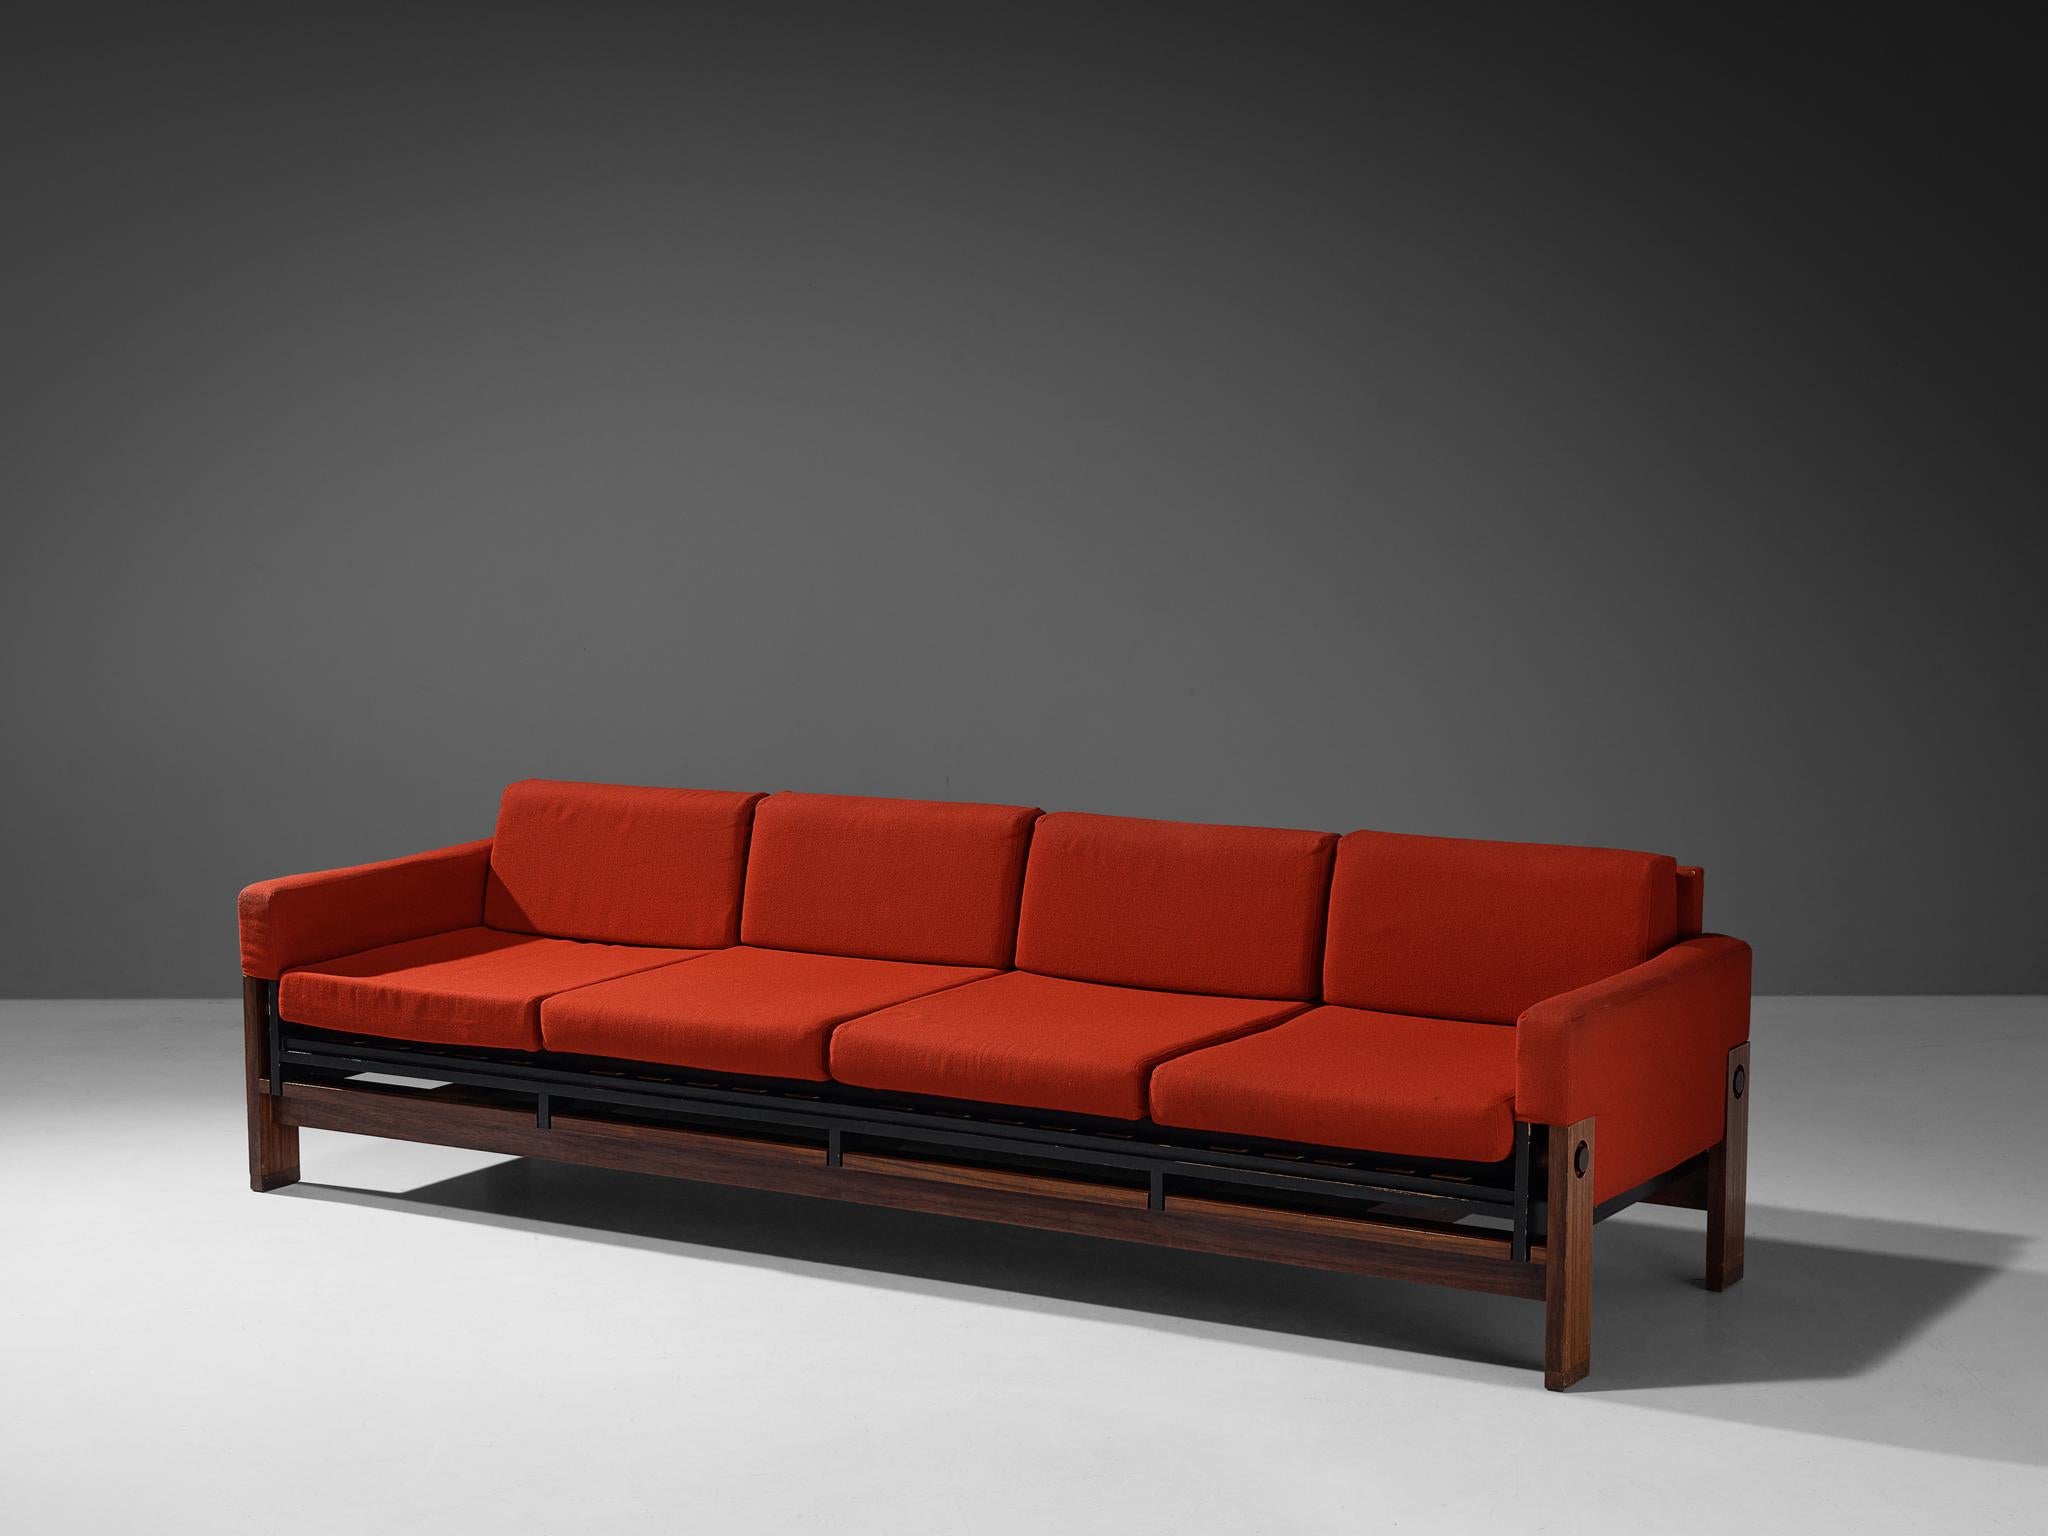 Pieter de Bruyne four seat sofa, padouk, wool, Belgium, 1960s

Spacious and powerful sofa designed by Belgian designer Pieter de Bruyne. This sofa is made mainly in padouk, the preferred wood type of de Bruyn for his designs, and black lacquered